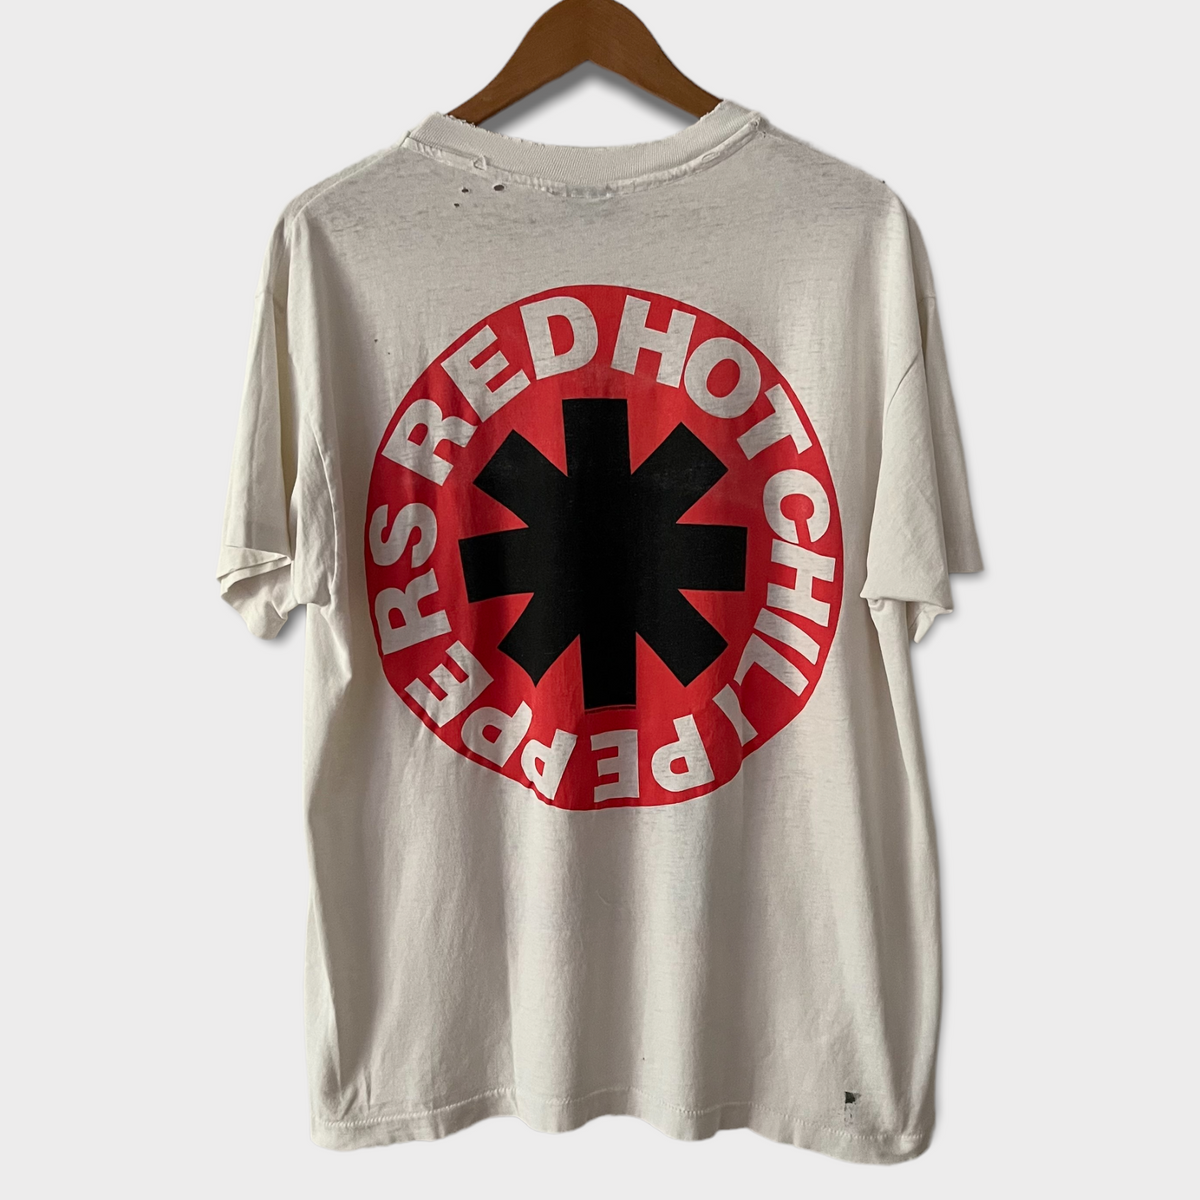 1992 Red Hot Chili Peppers Vintage Promo Tee Shirt